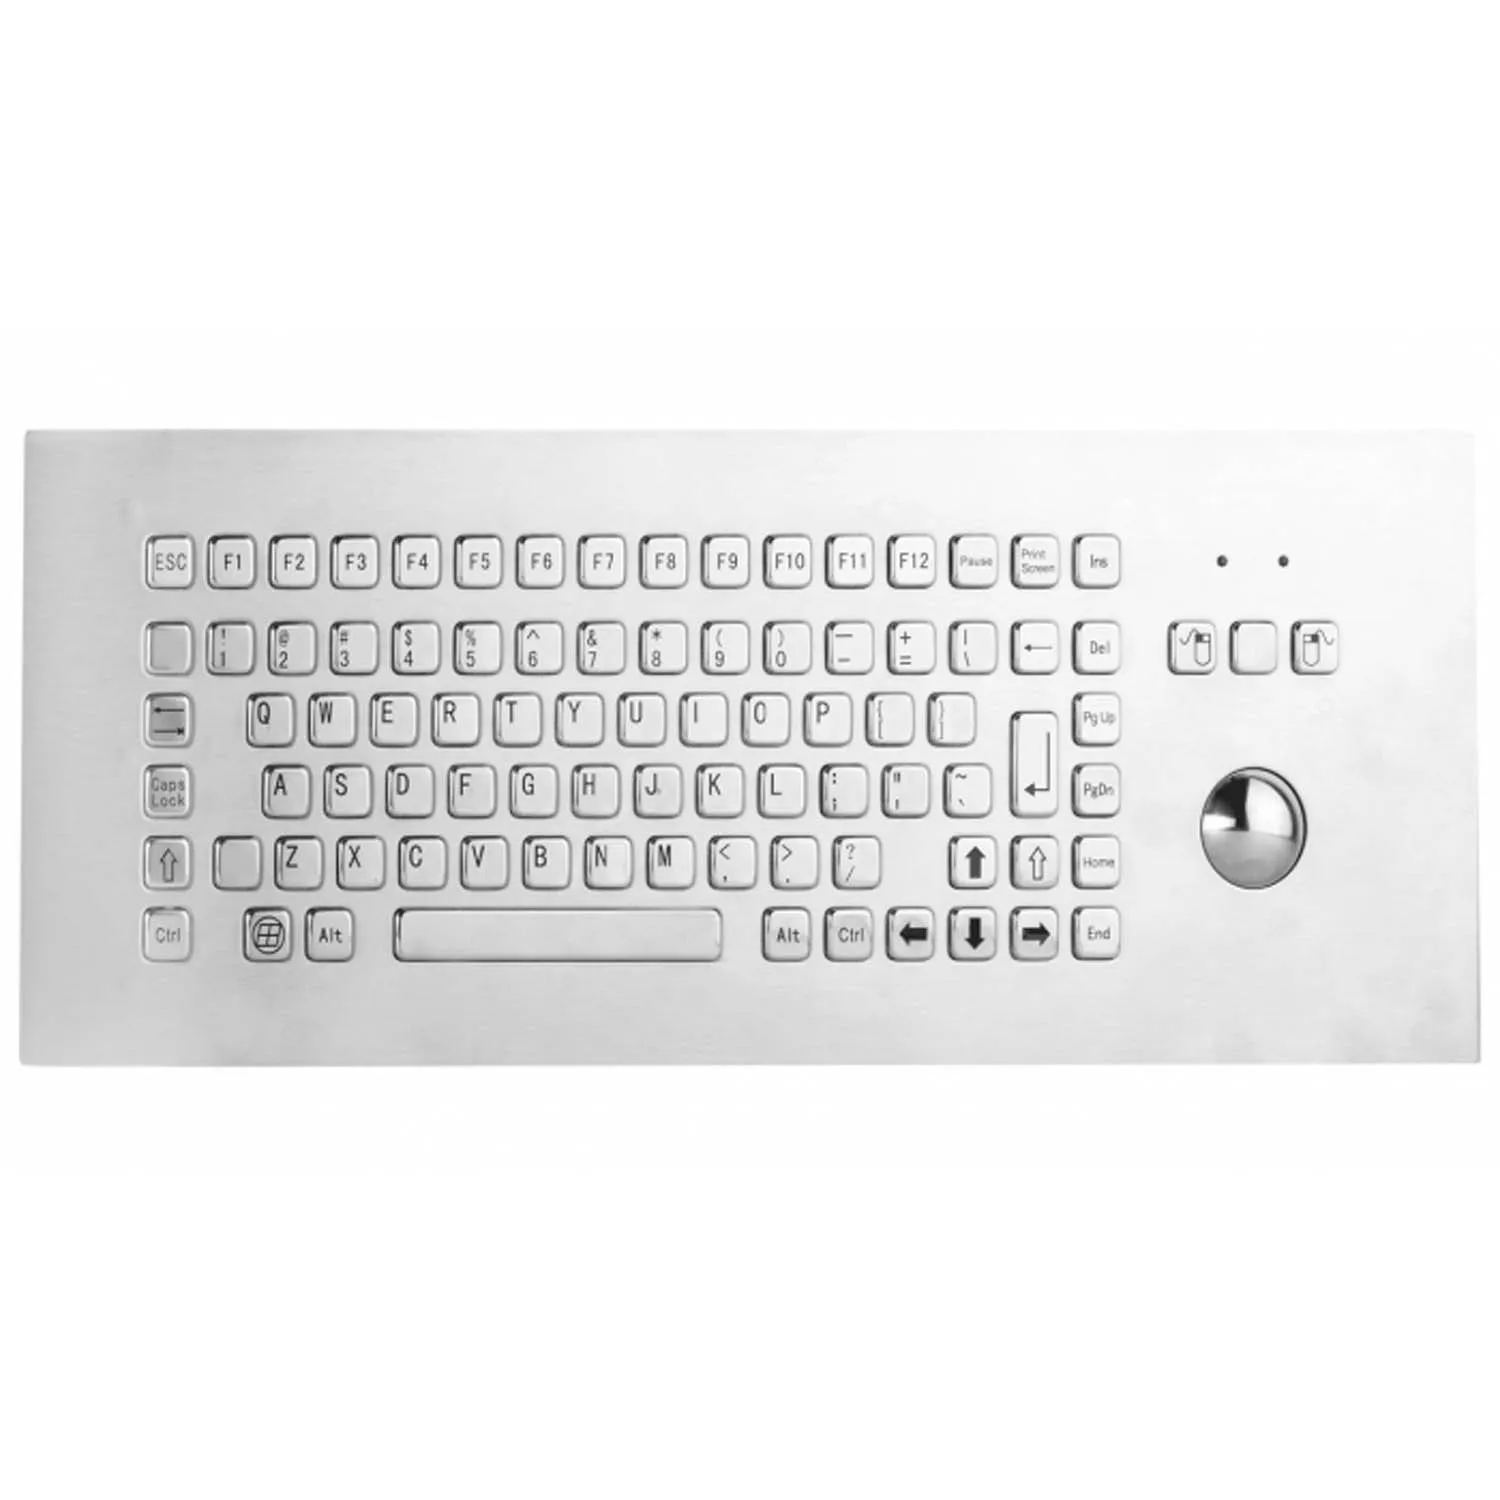 Rugged panel mount keyboard WITH TRACKBALL KB-000-NW0S0T3 embedded